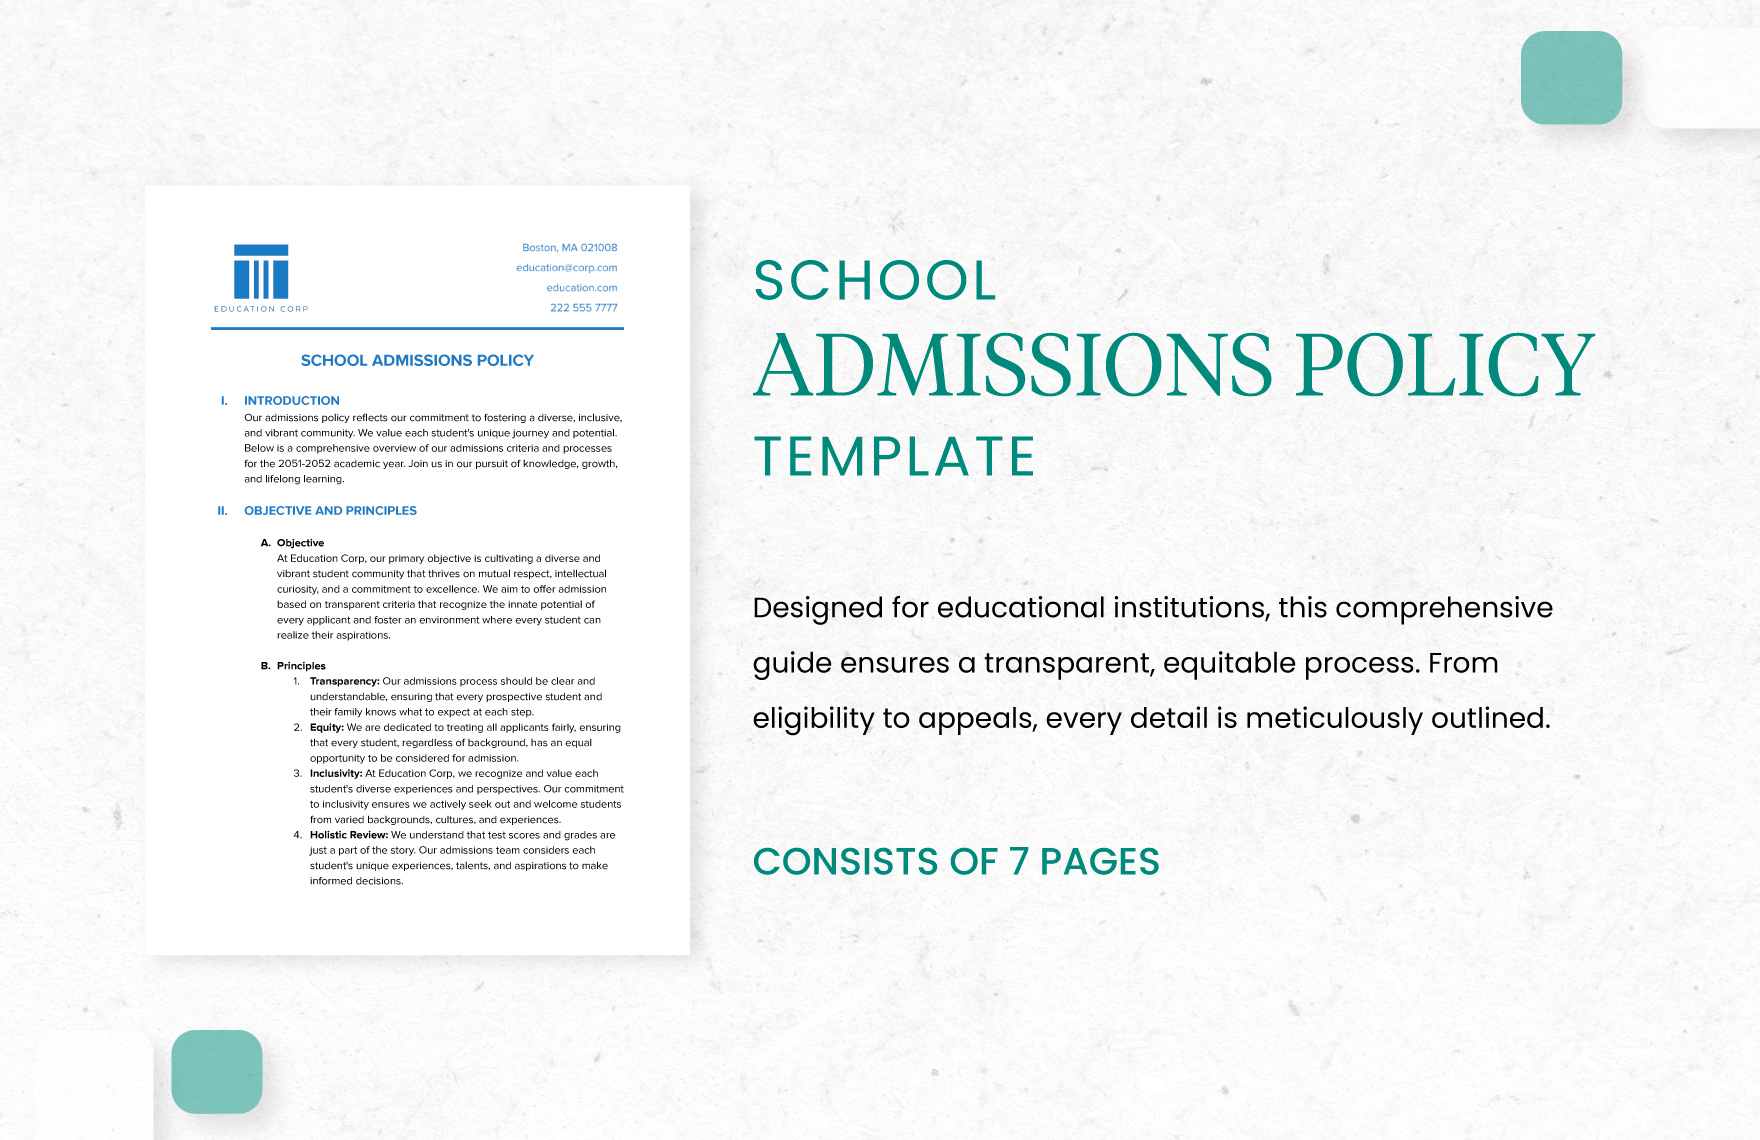 School Admissions Policy Template